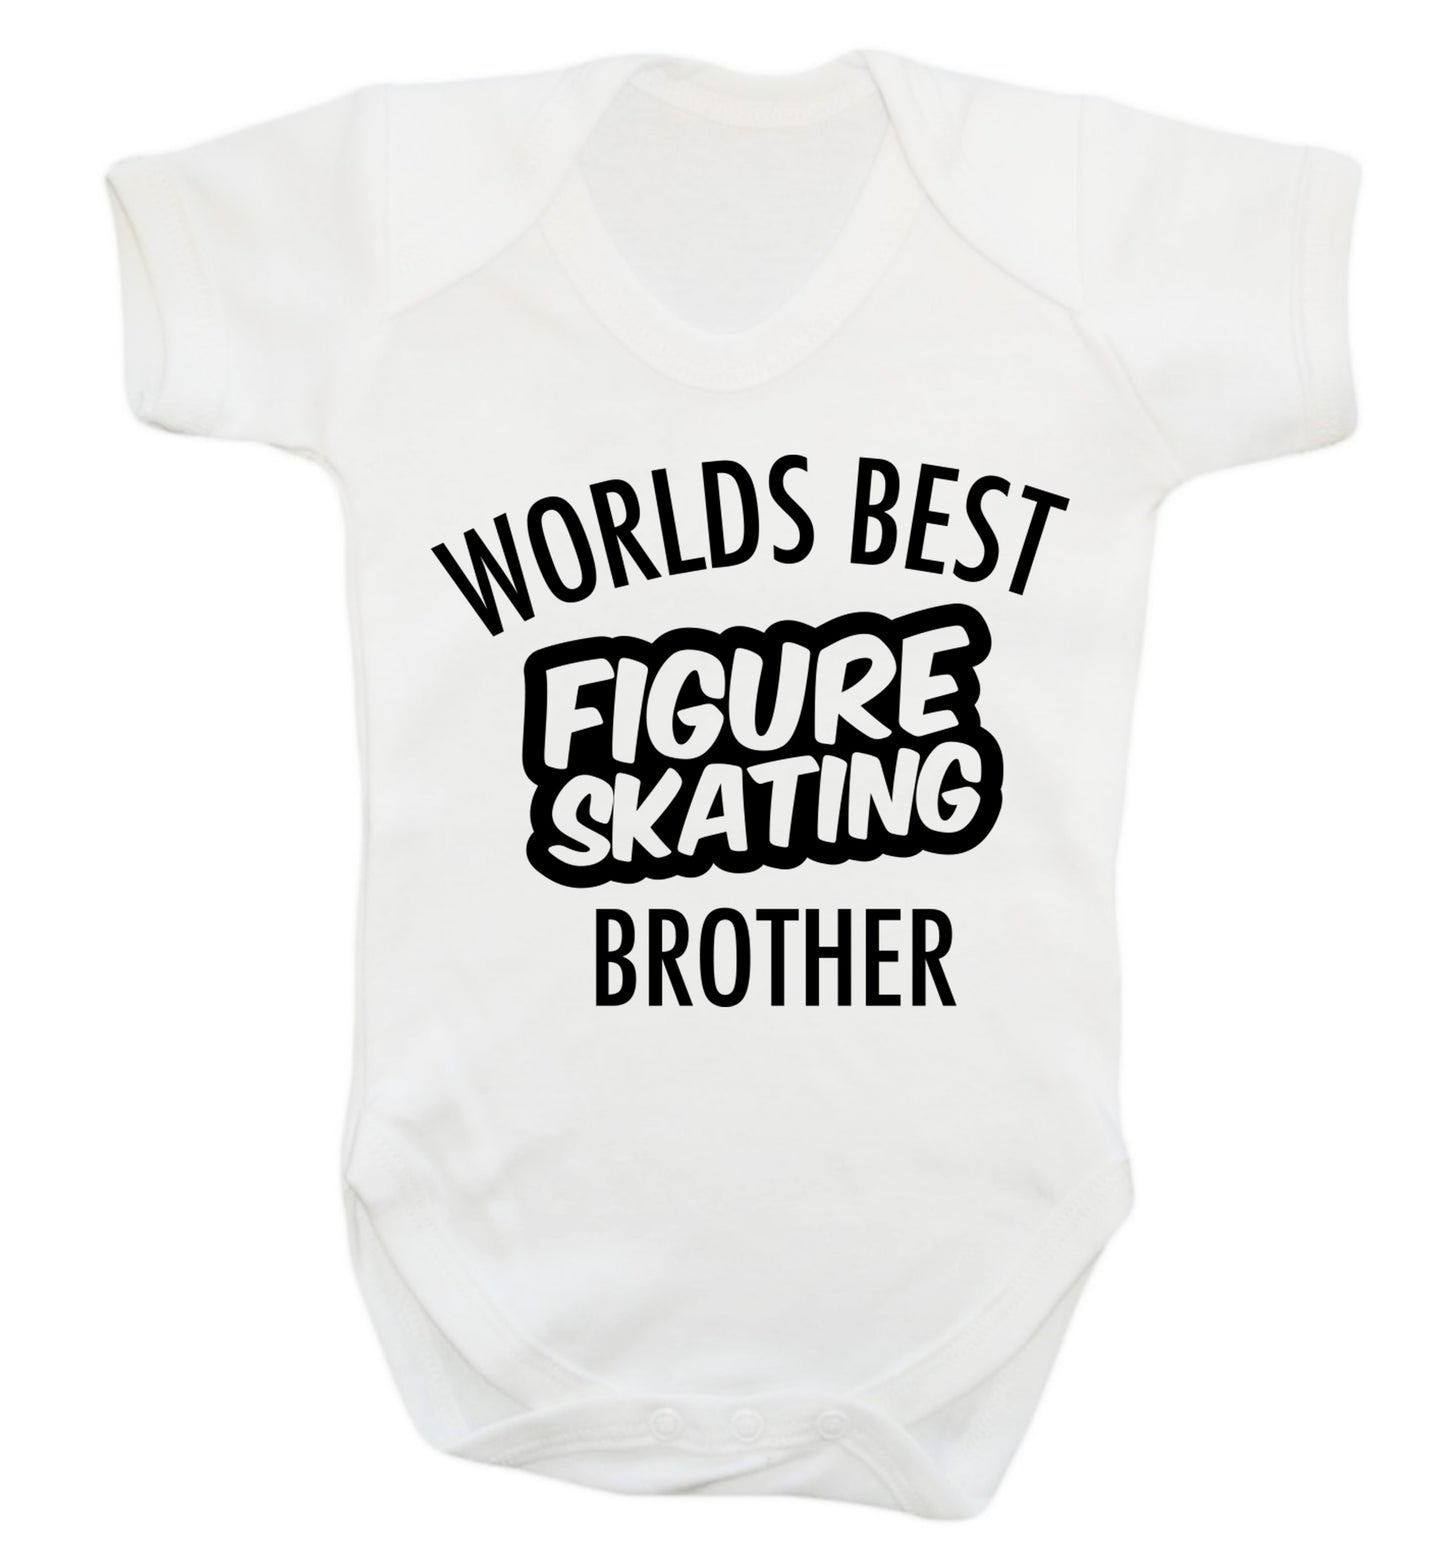 Worlds best figure skating brother Baby Vest white 18-24 months